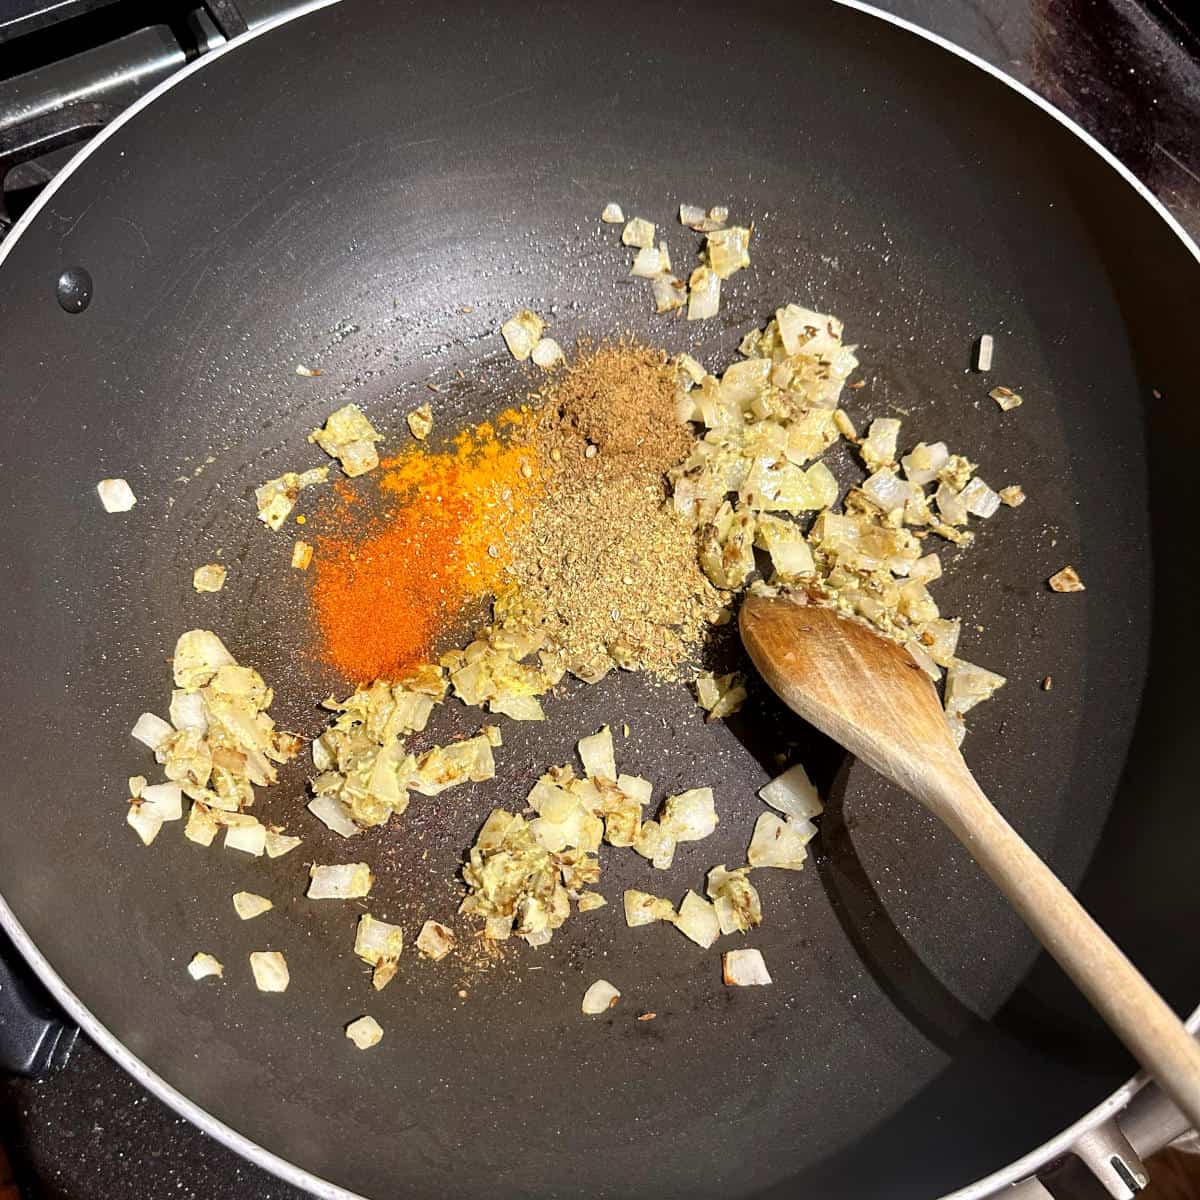 Spices added to onions and garlic in wok.